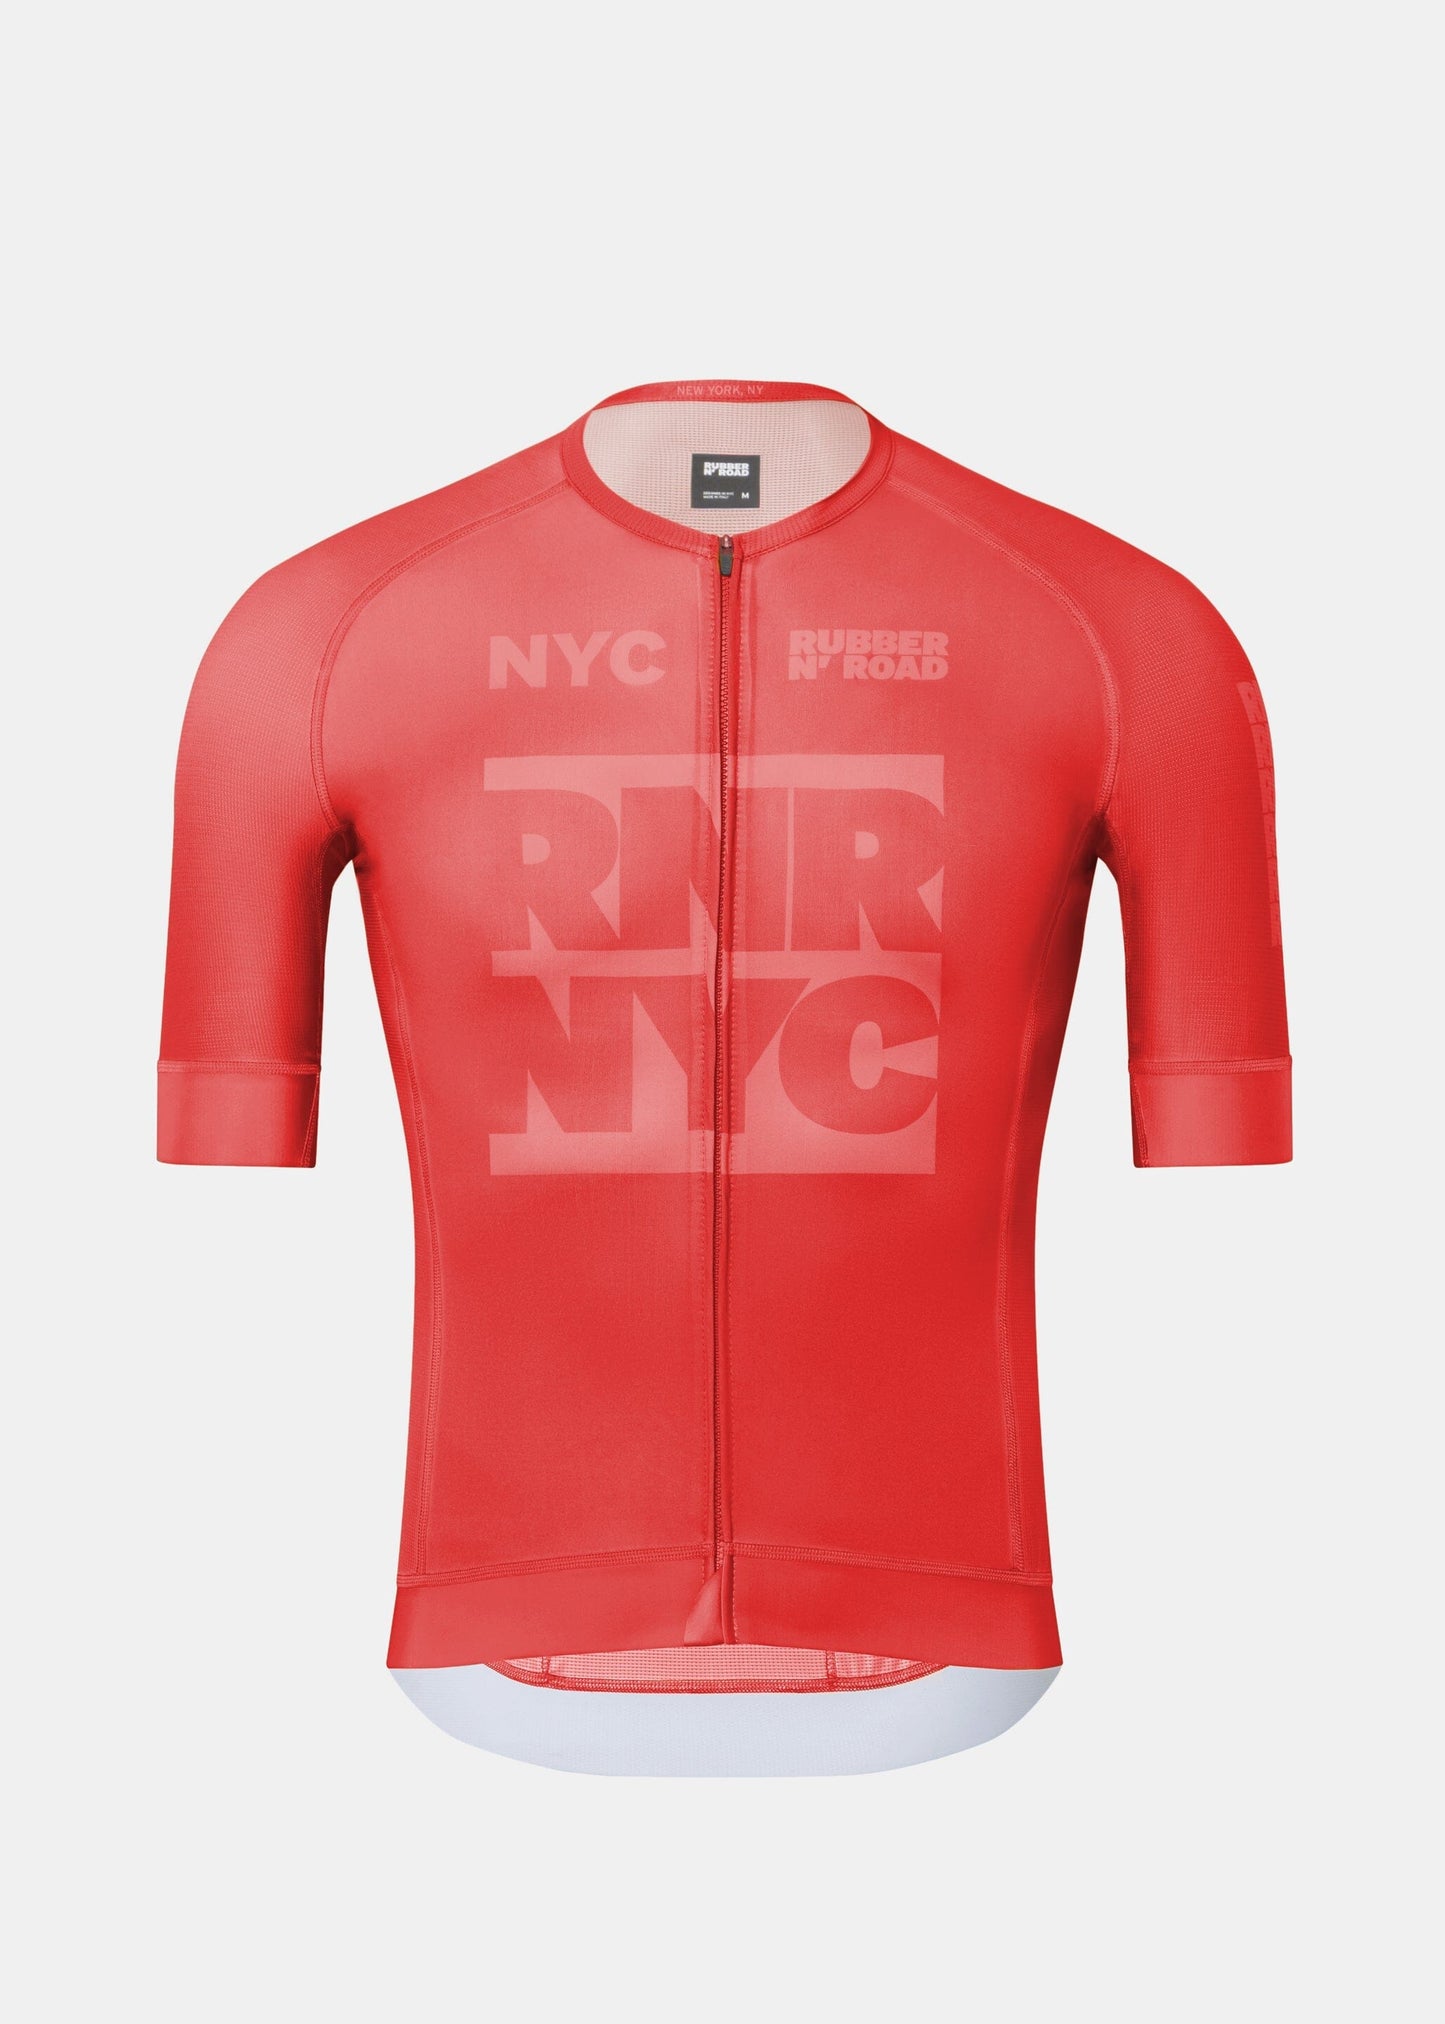 Rubber N' Road - Maillot Shadow Maillots Rubber N' Road Red S 